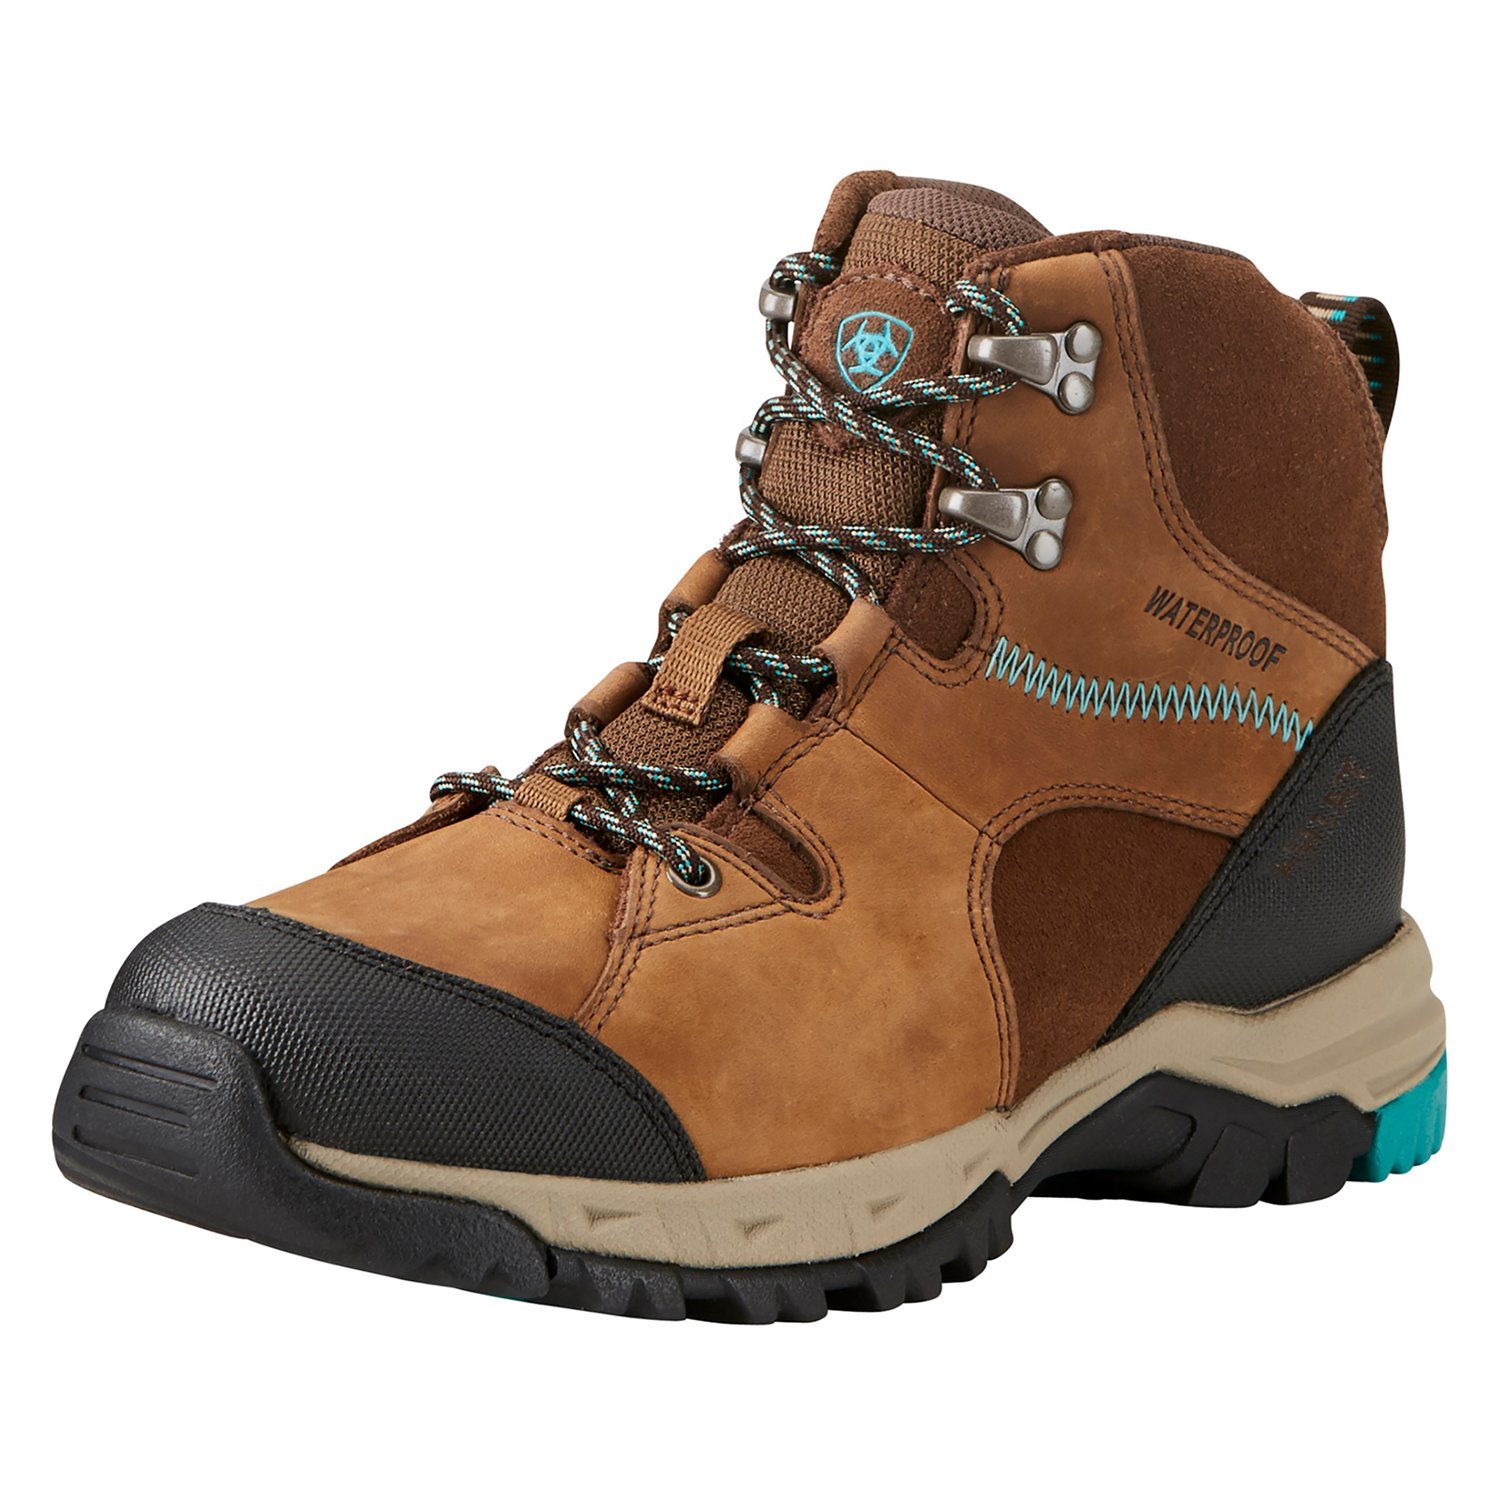 ARIAT Outdoorschuh Skyline Mid H2O distressed brown | 40